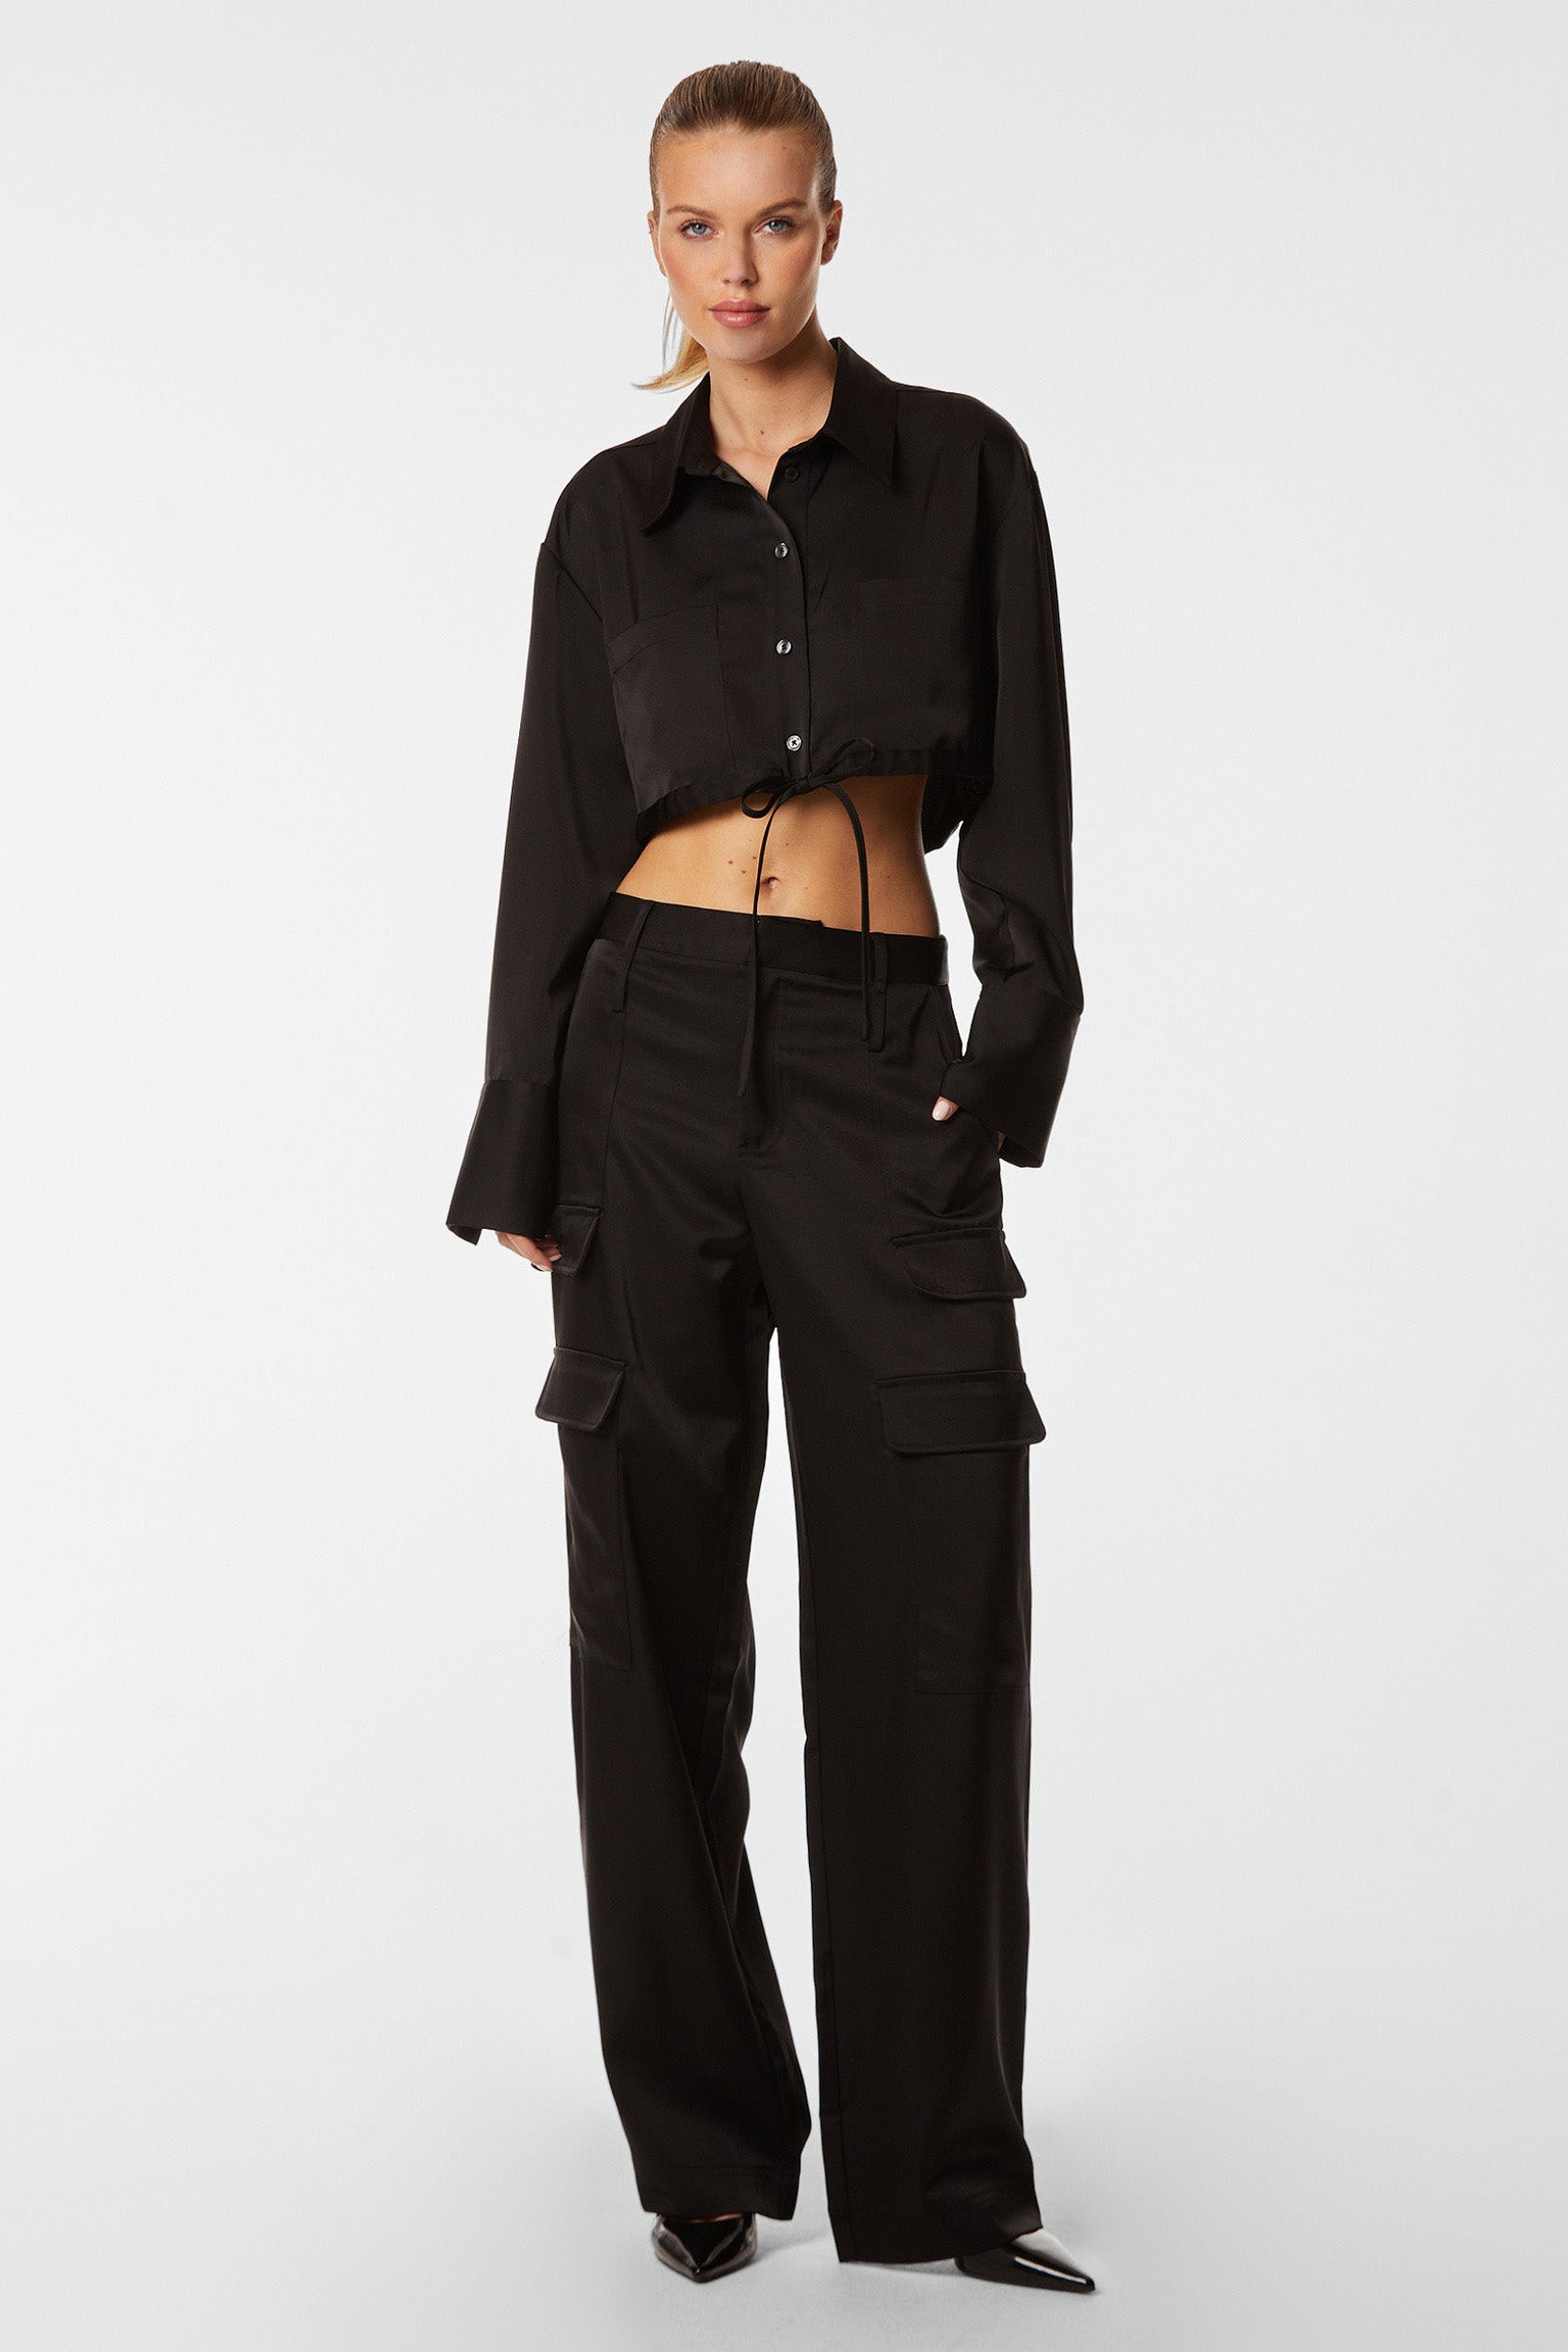 A woman stands against a plain white background, wearing a black, long-sleeve crop top shirt with large cuffs and the Milan Satin Cargo Pant - Black, featuring mid-rise and multiple pockets. She has her hair pulled back and poses with one hand in a pocket, exuding a casual yet stylish look.